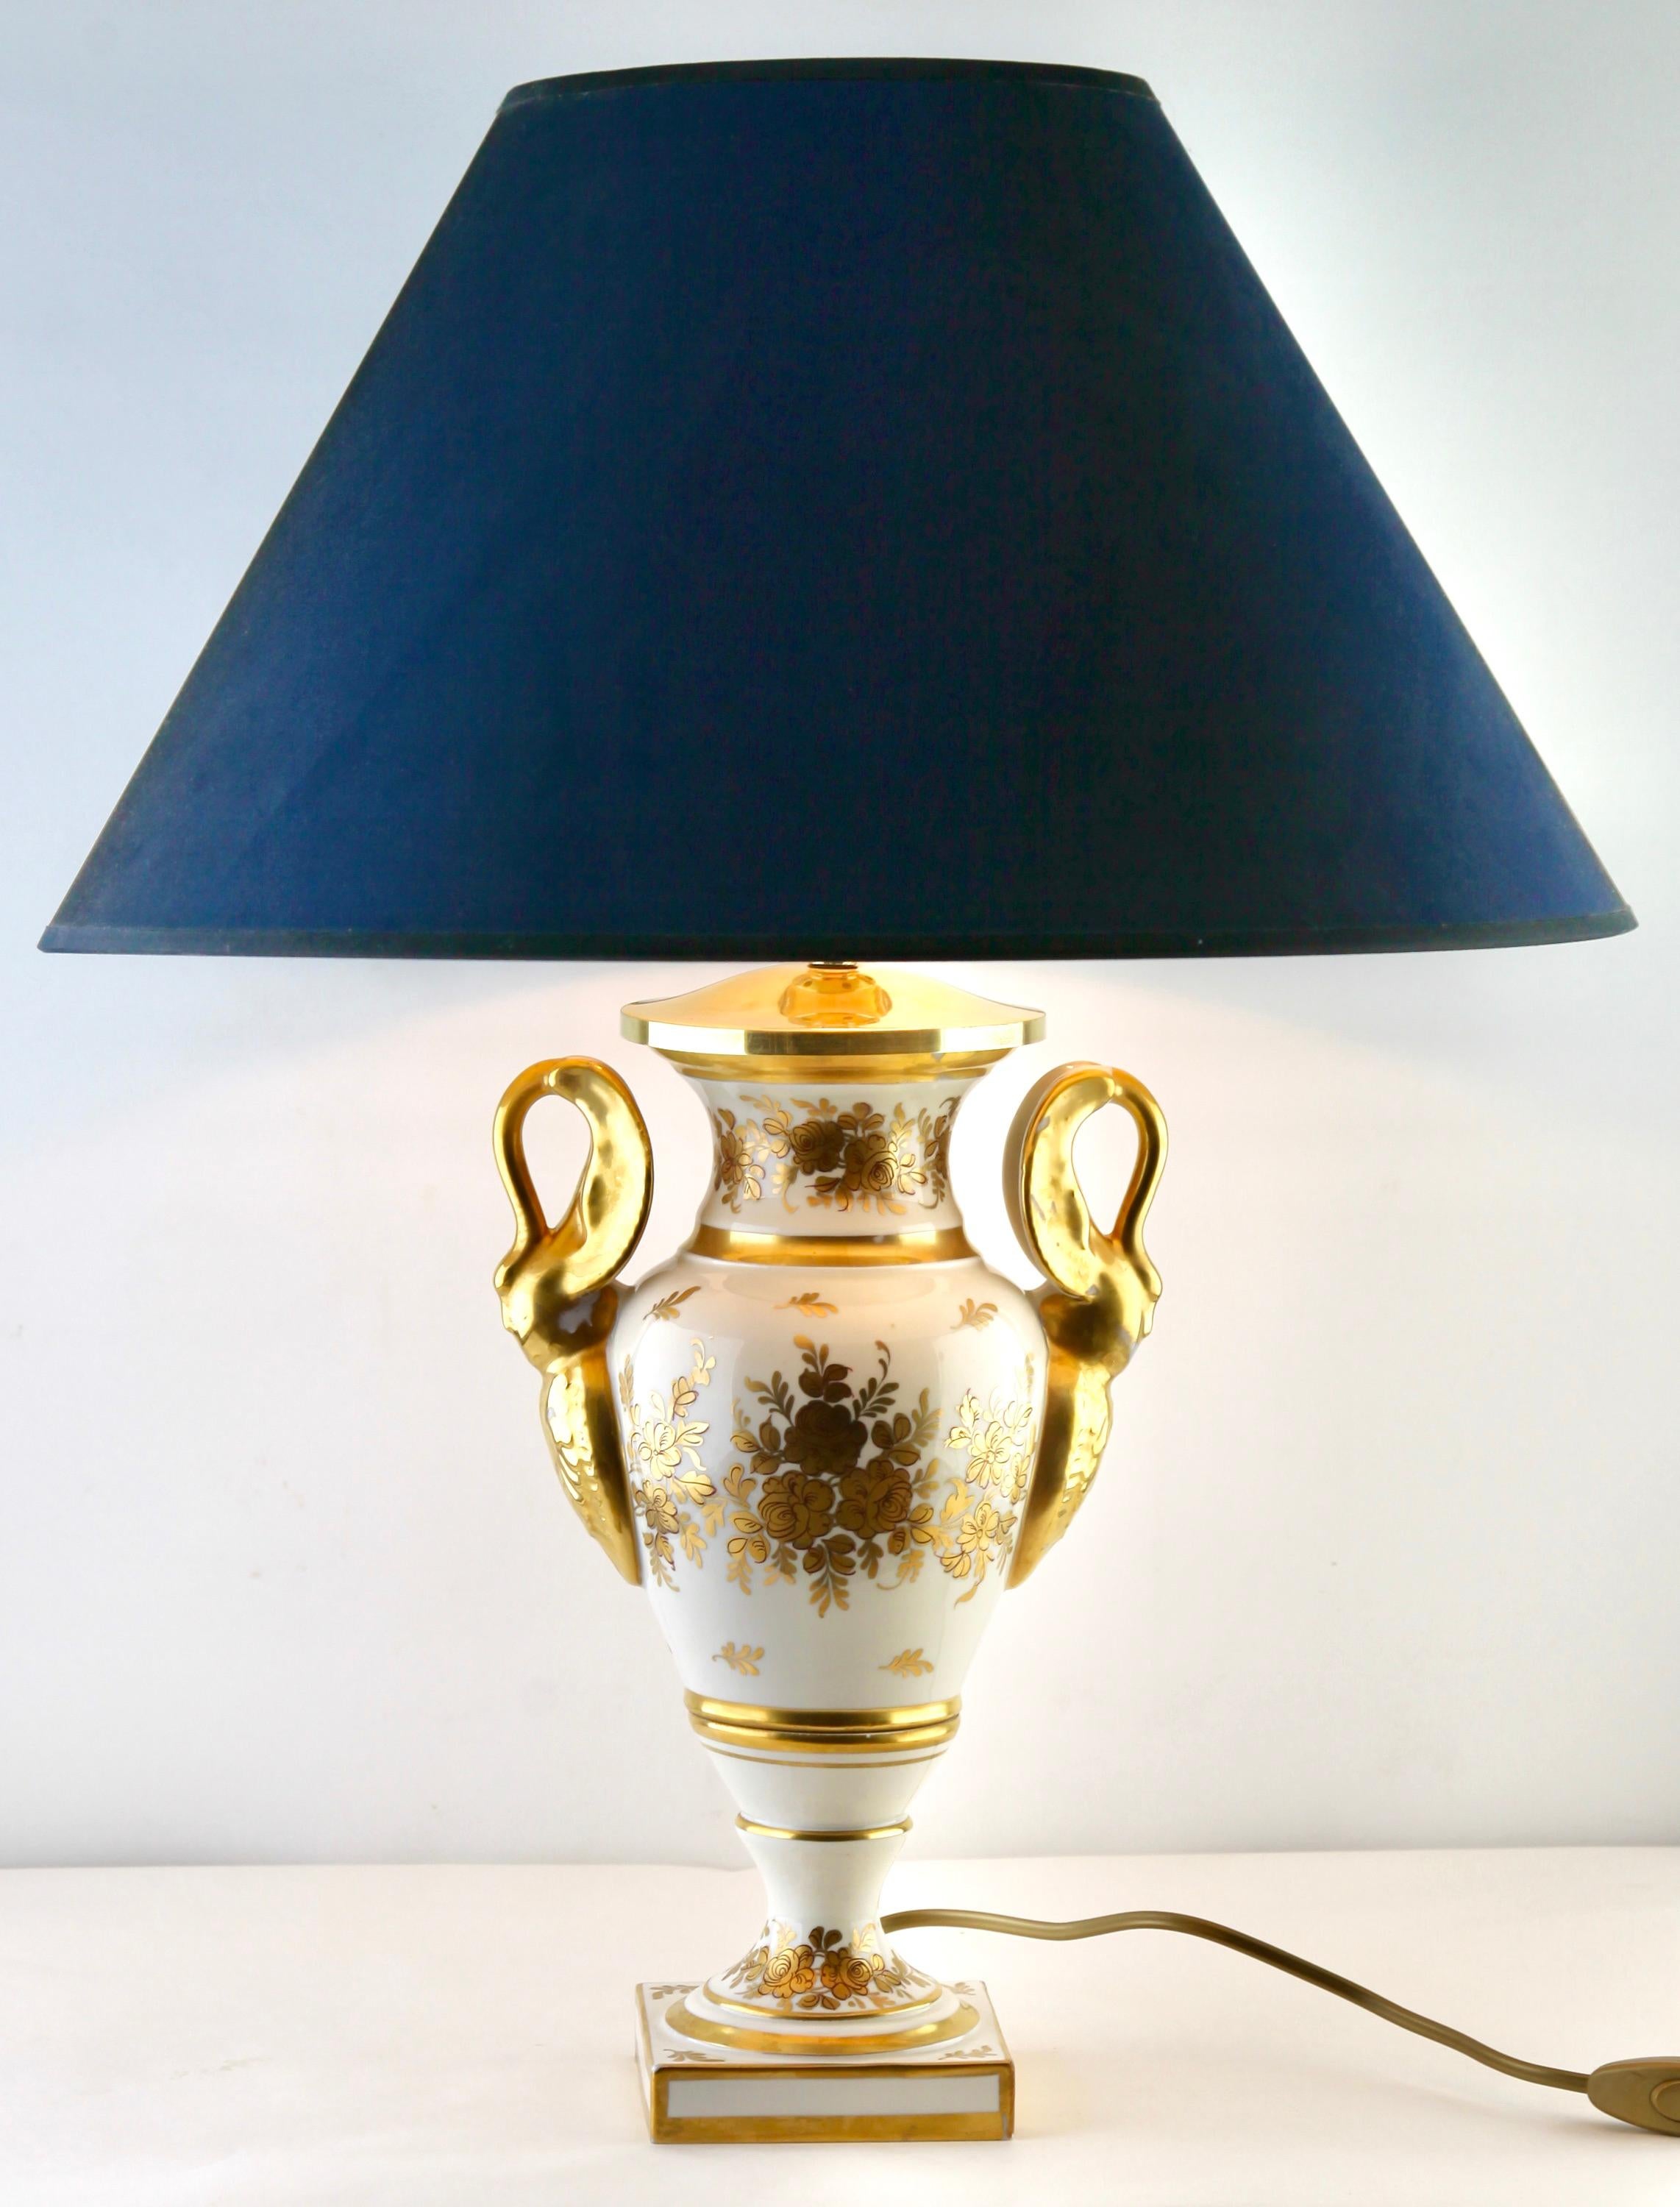 Porcelain table lamps France Signed

Inspired by an old technique of French ceramics, this elegant table lamp is bright 
and Handmade with hand-painted decoration.

In Good condition and in full working order. 
Having recently been re-wired